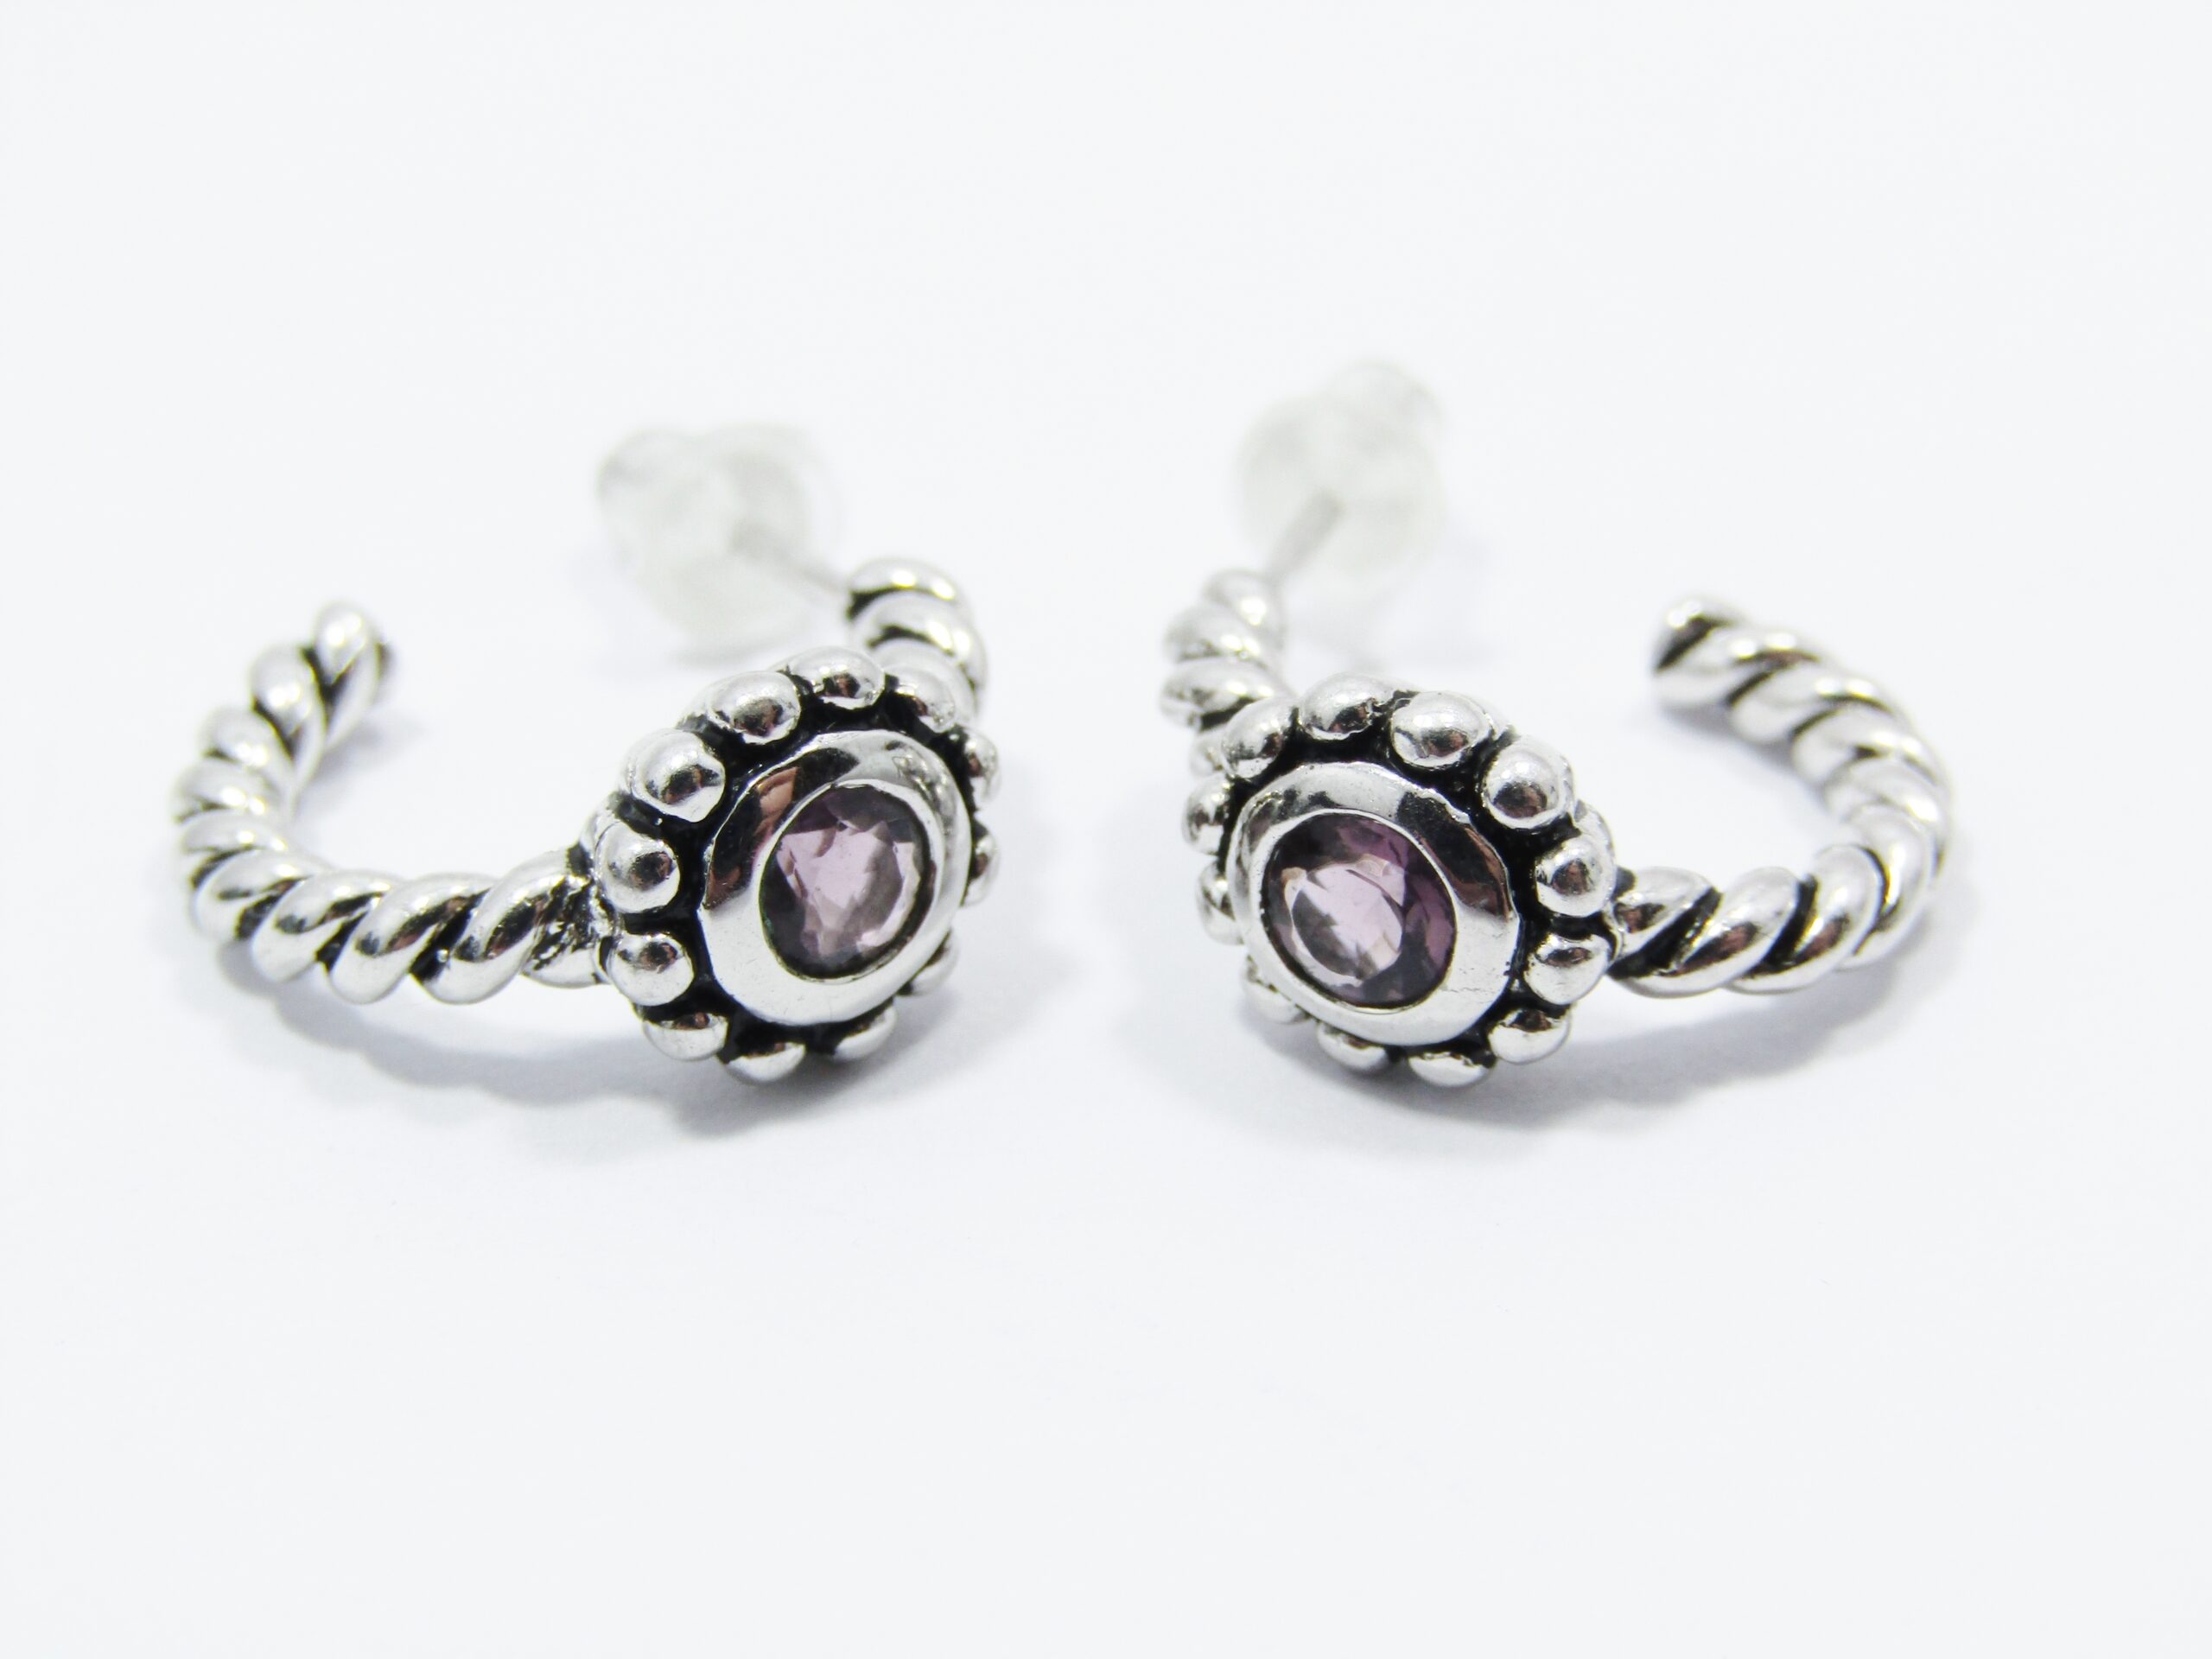 A Lovely Pair of Rope Design Earrings with an Amethyst Stone in Sterling Silver.